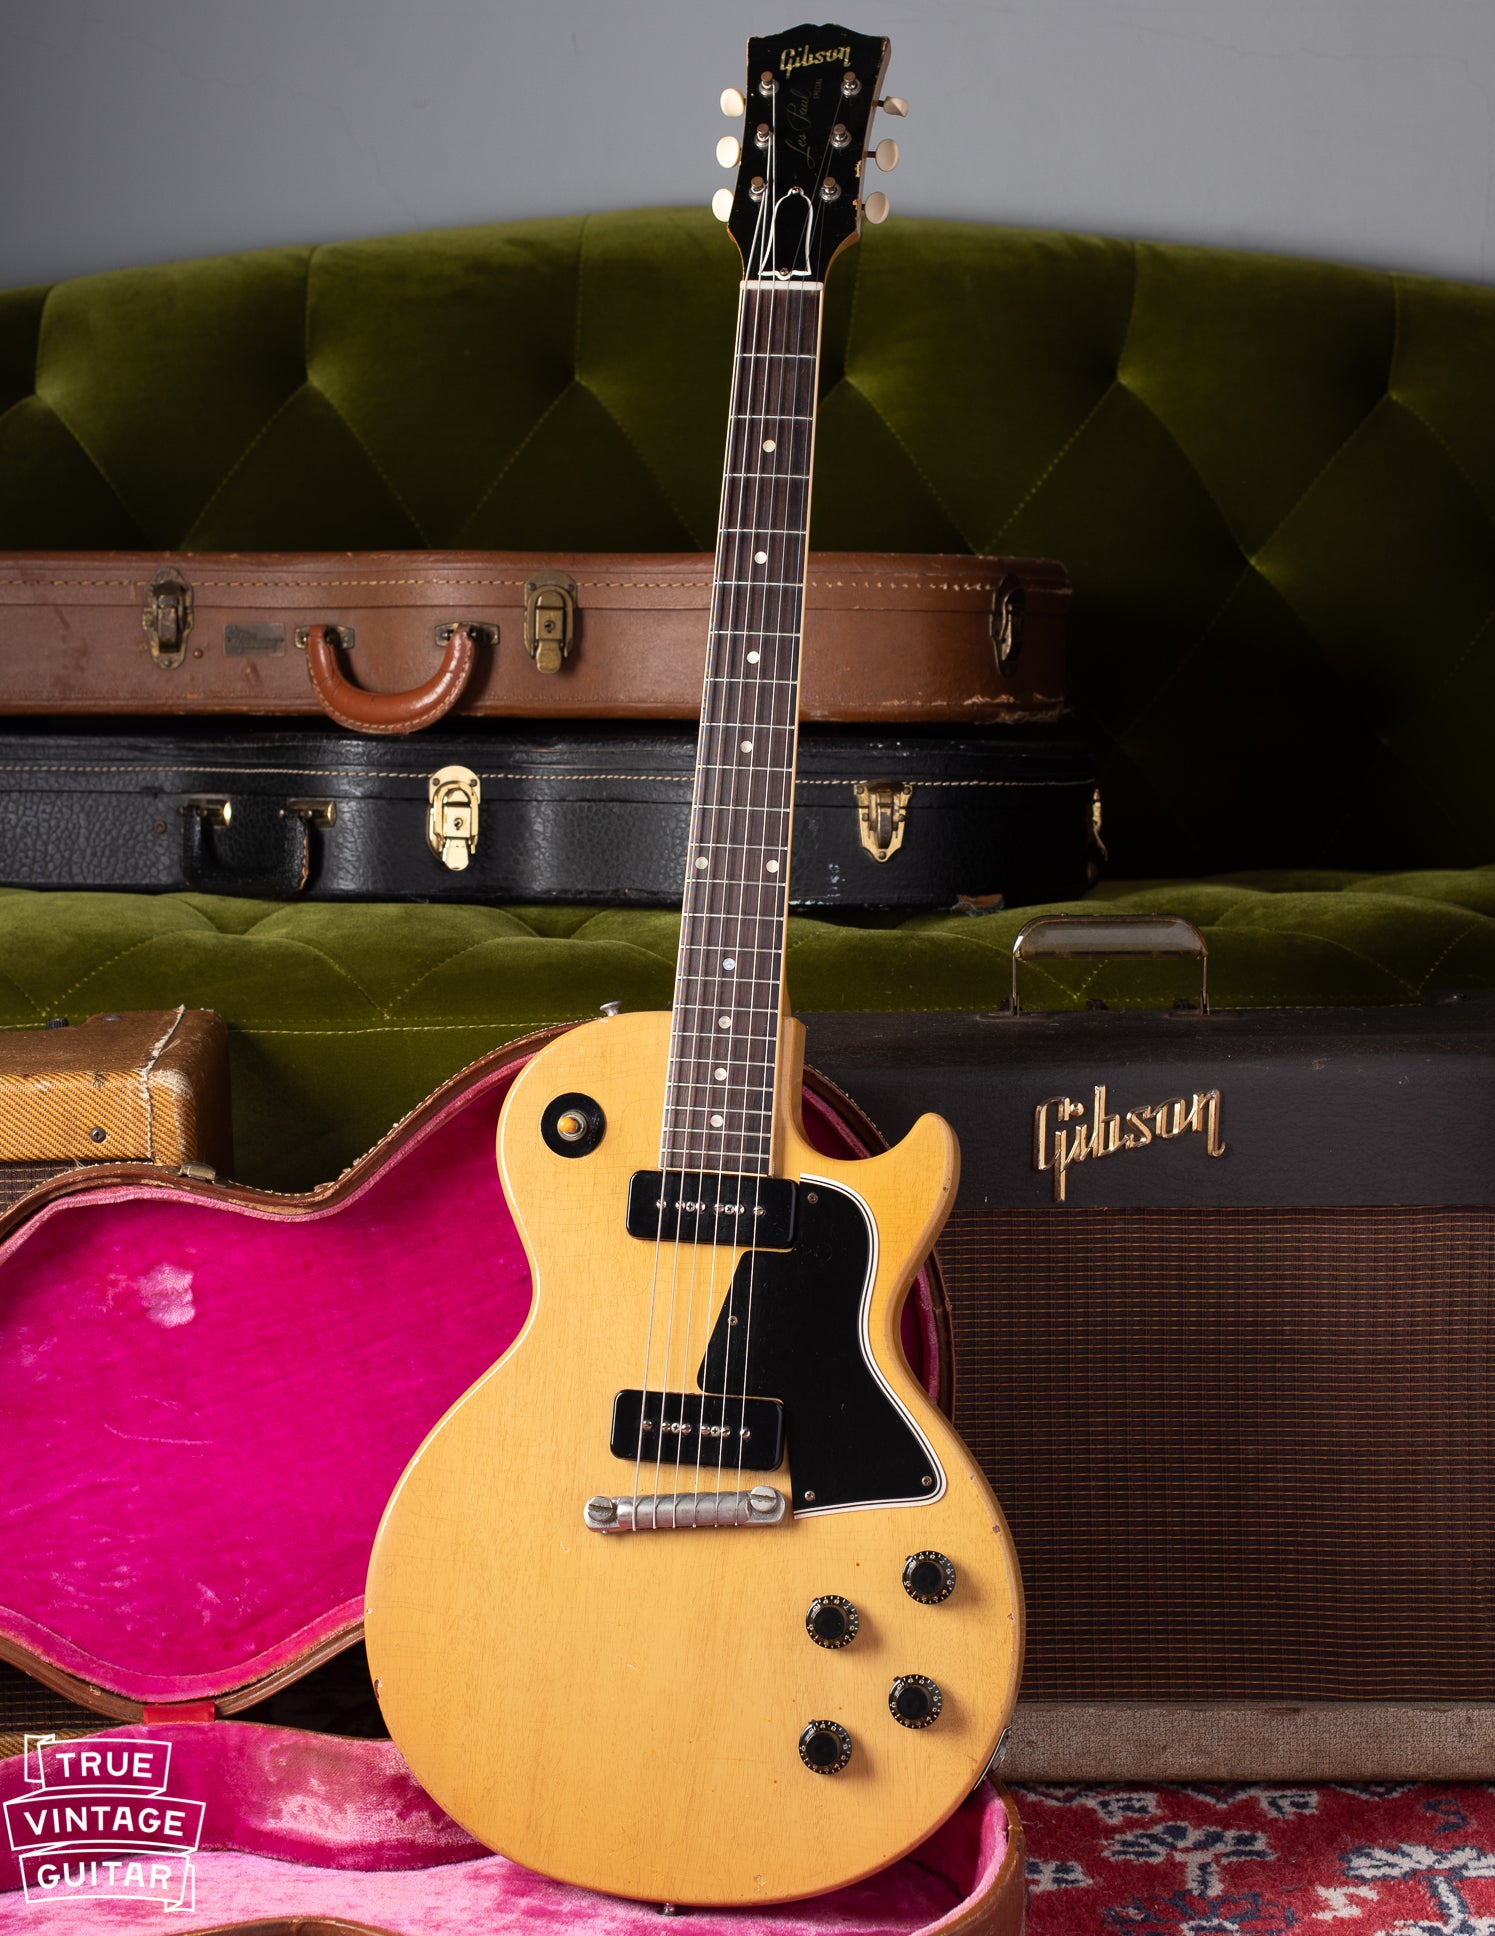 Gibson Les Paul Special 1956 guitar in TV Yellow